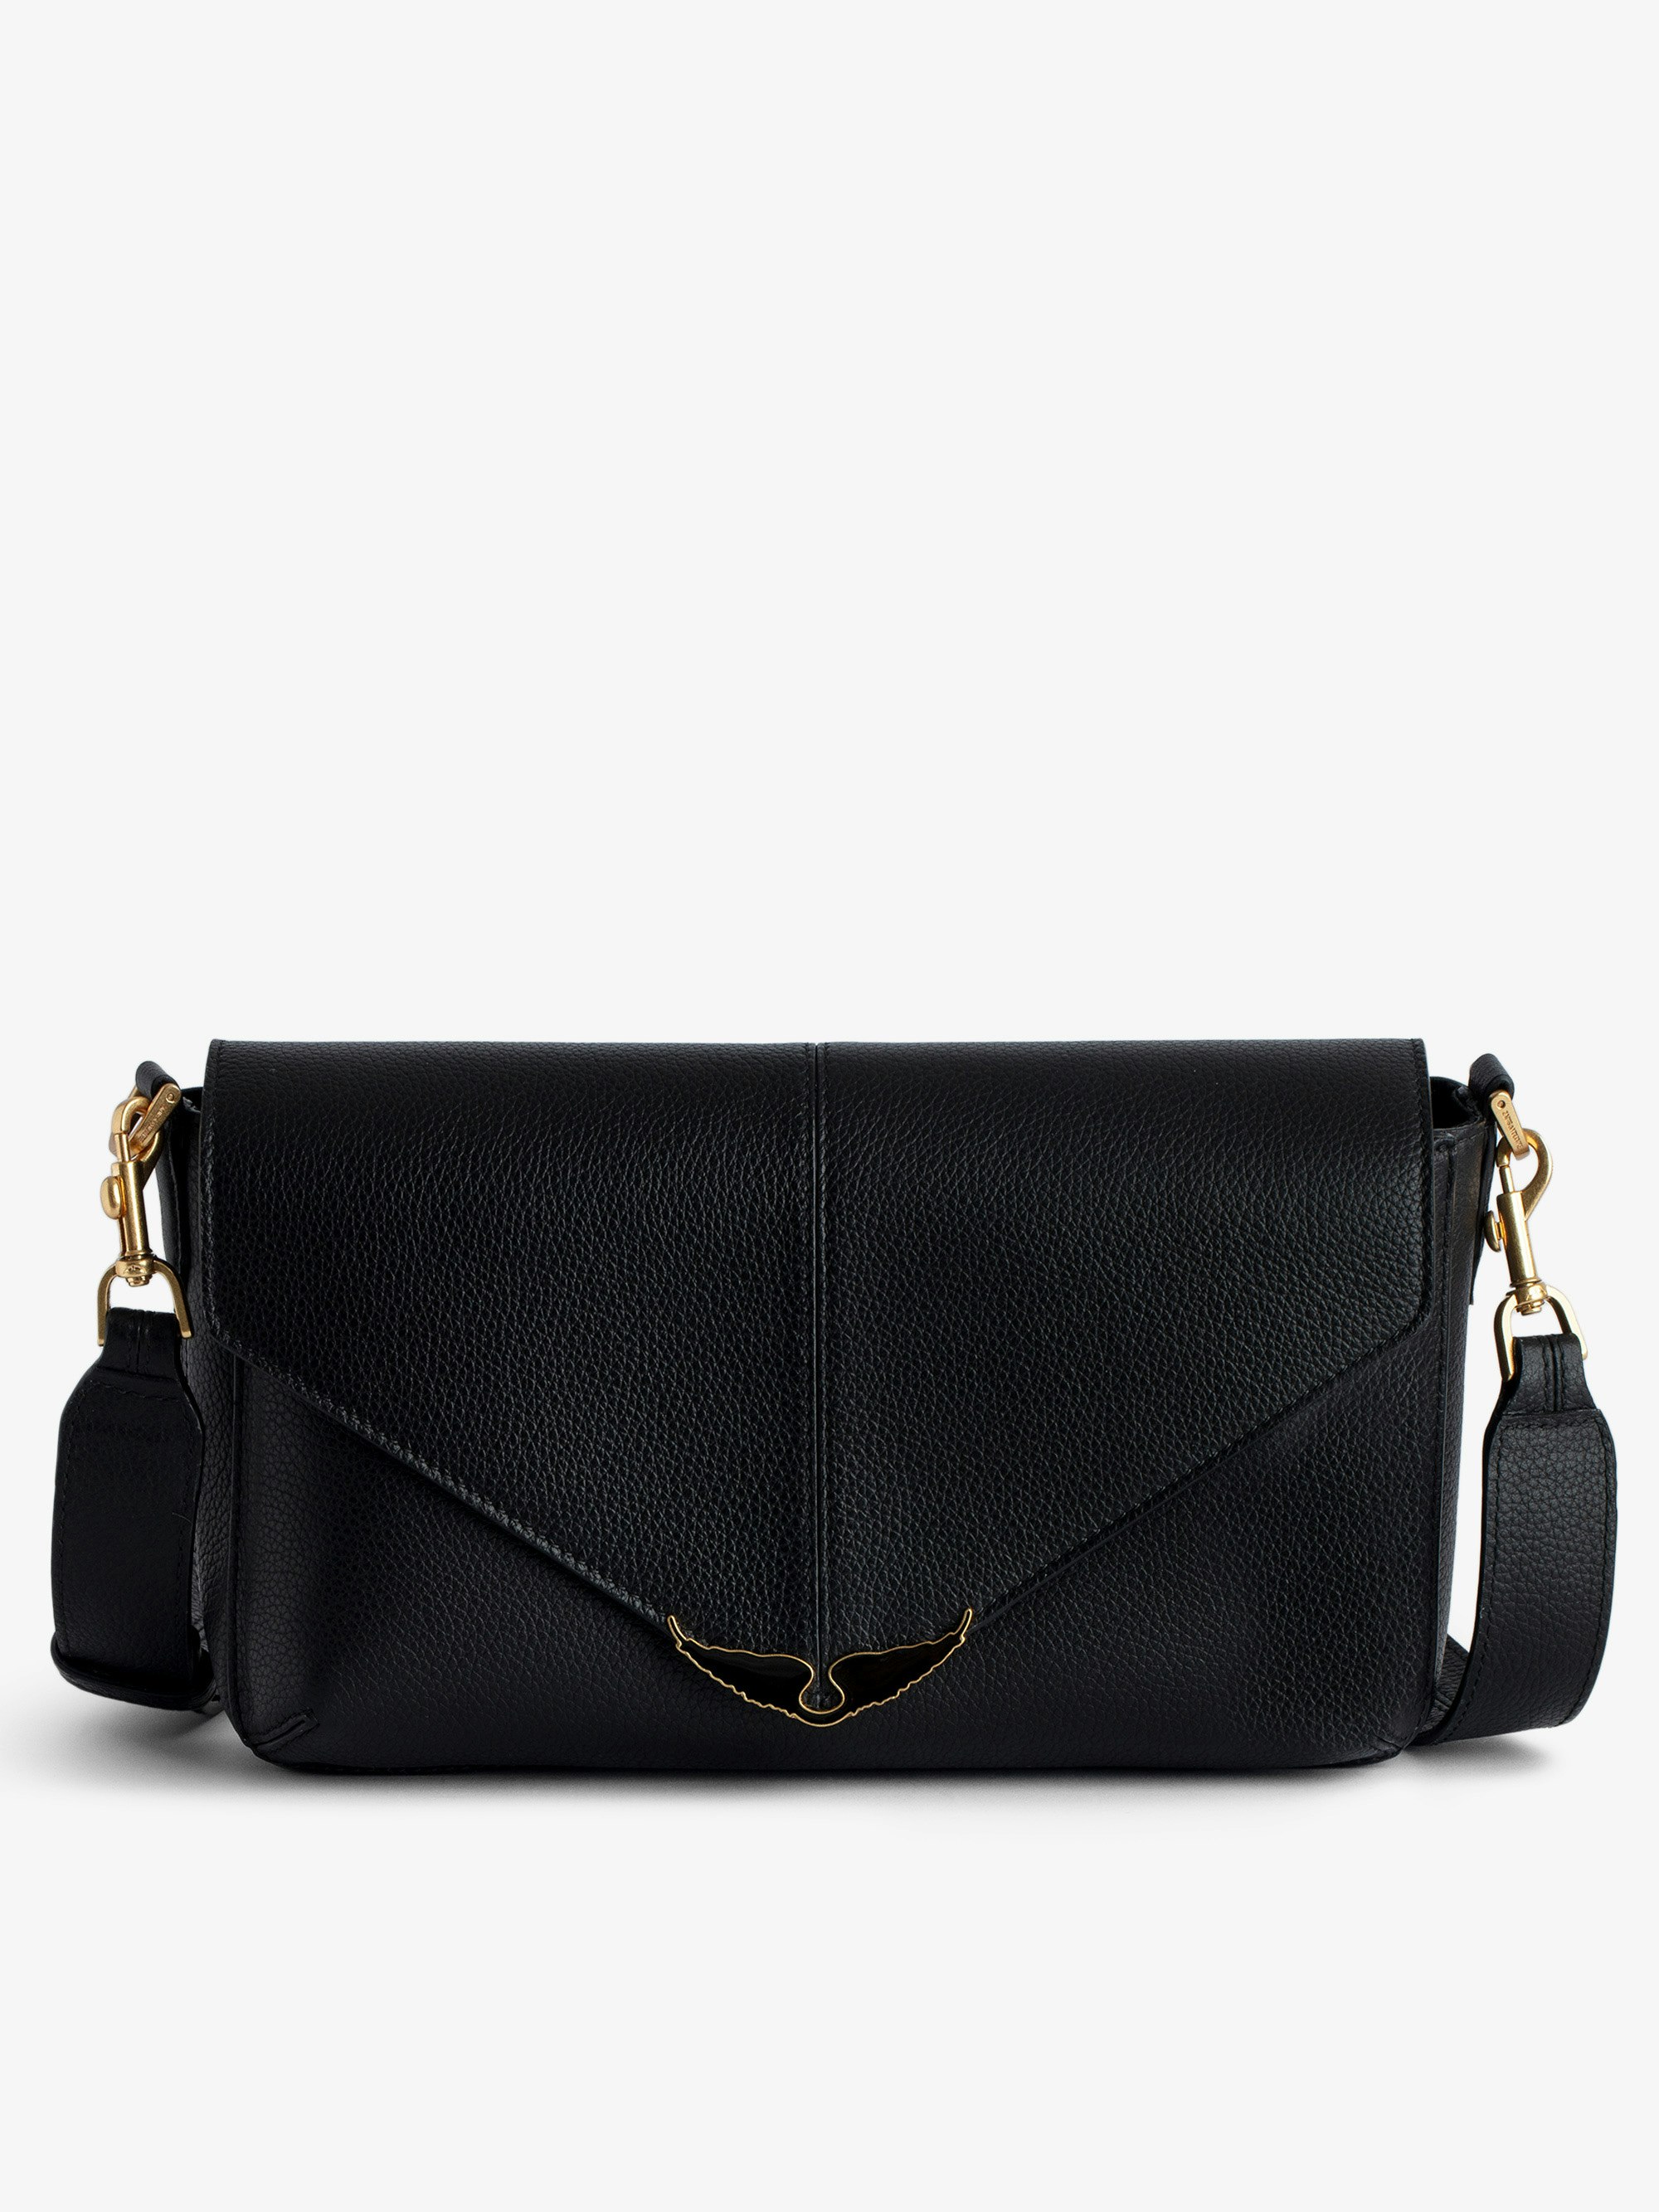 Borderline Daily Bag - Women’s black grained leather bag with shoulder strap and lacquered wings signature.